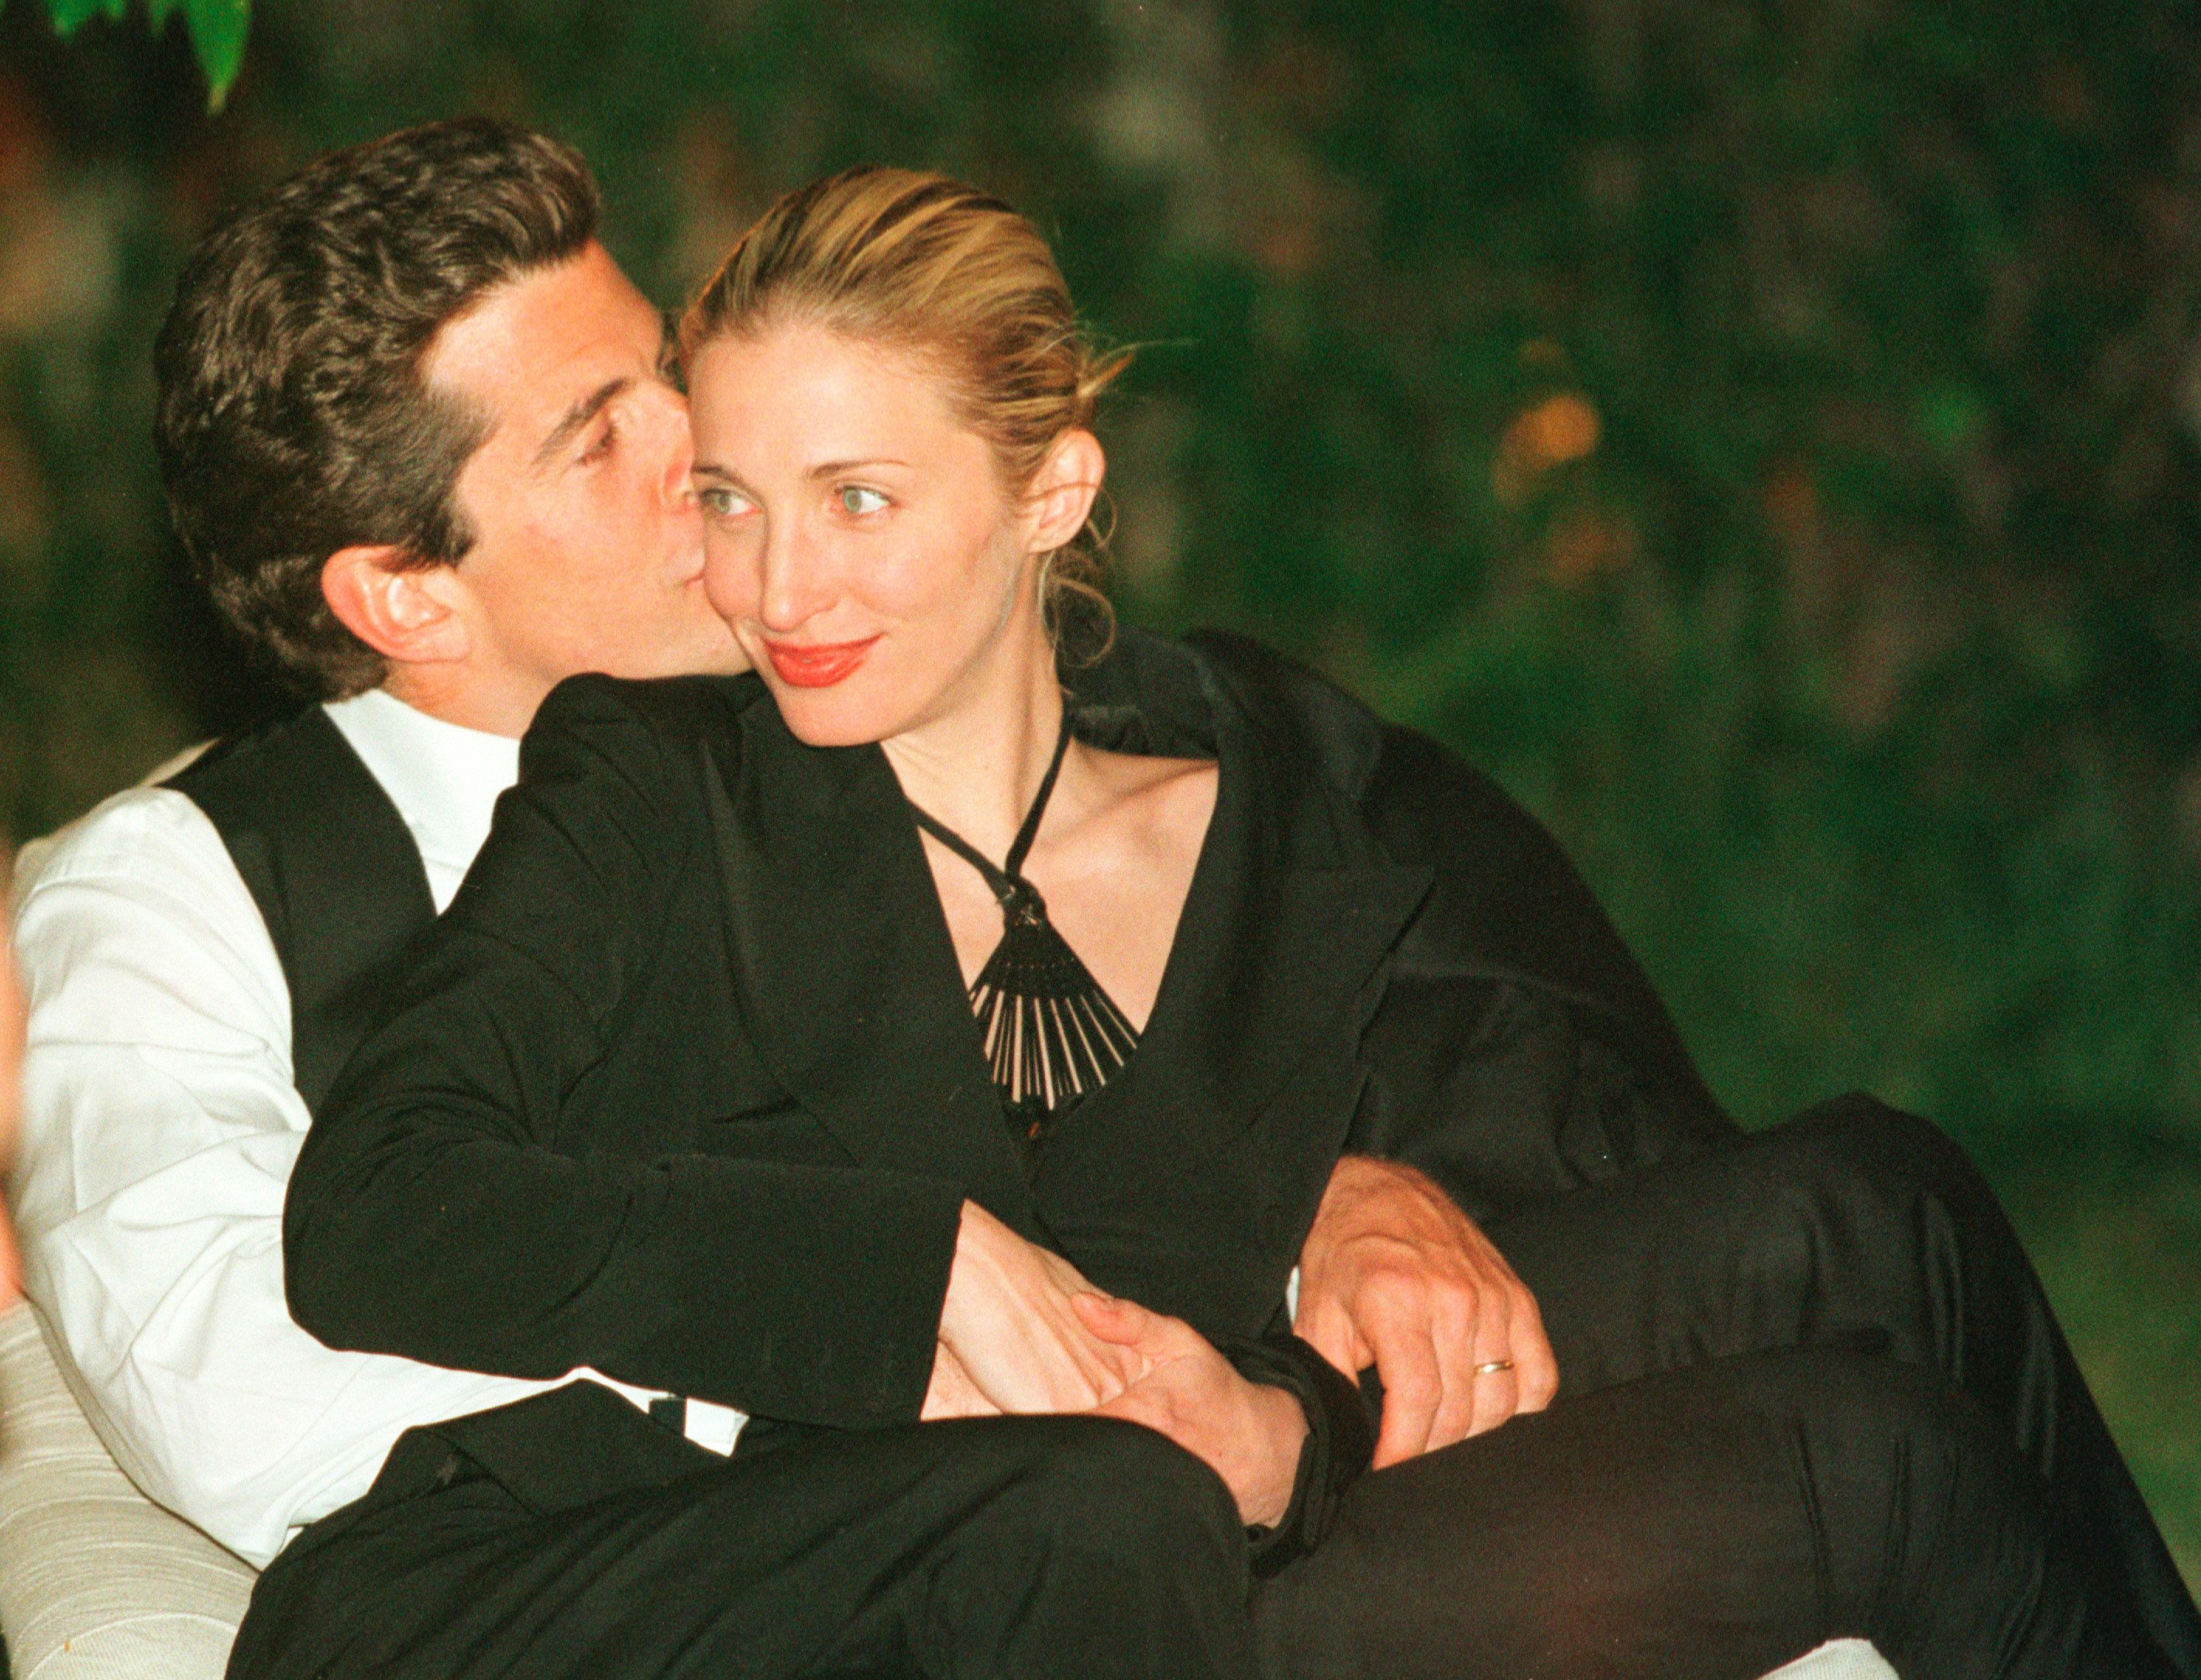 American Love Story: The real story of JFK Jr and Carolyn